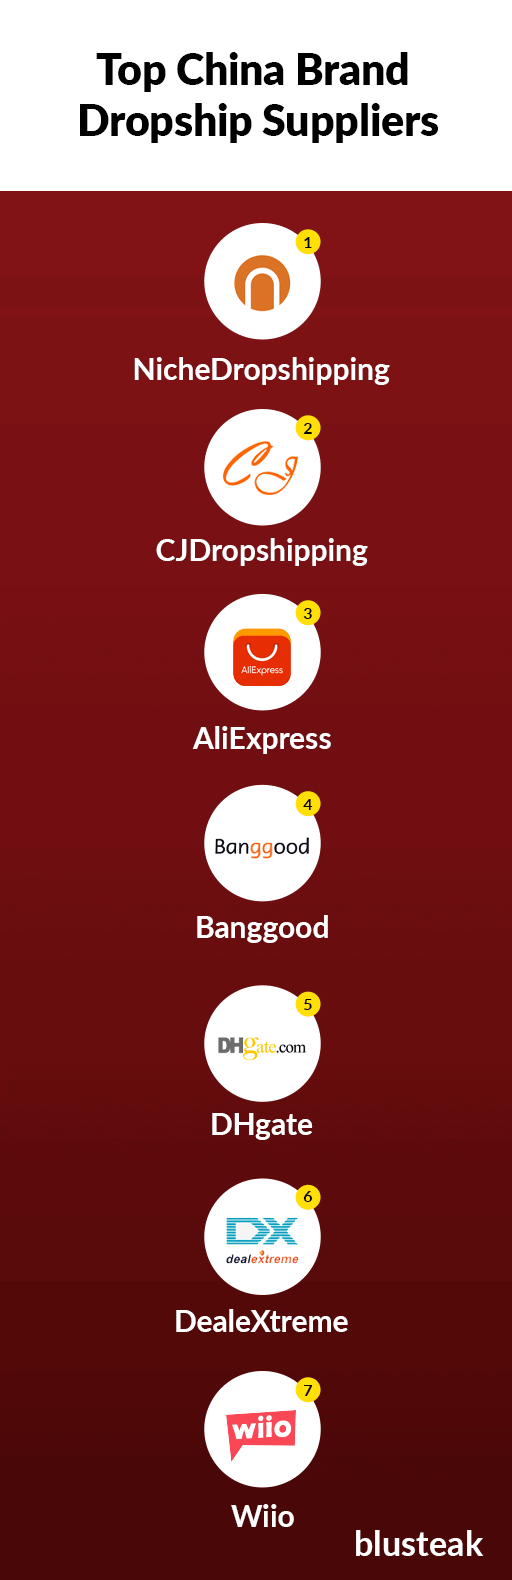 Top China Brand Dropship Suppliers